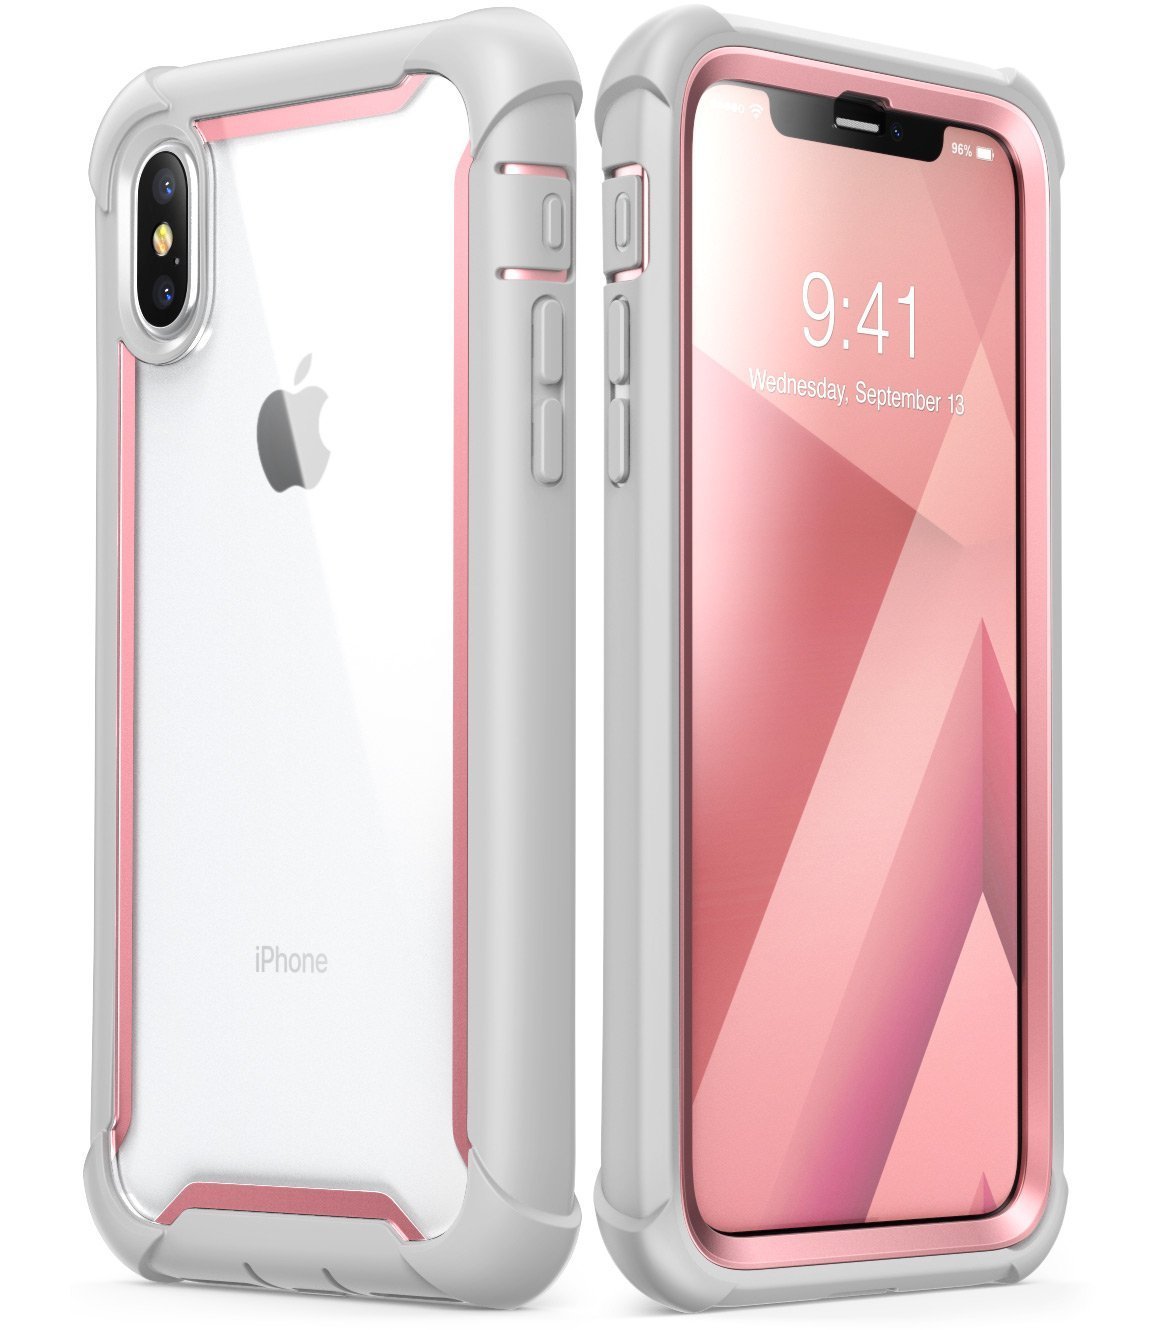 iPhone X case, i-Blason [Ares] Clear Bumper Case with screen guard, Pink